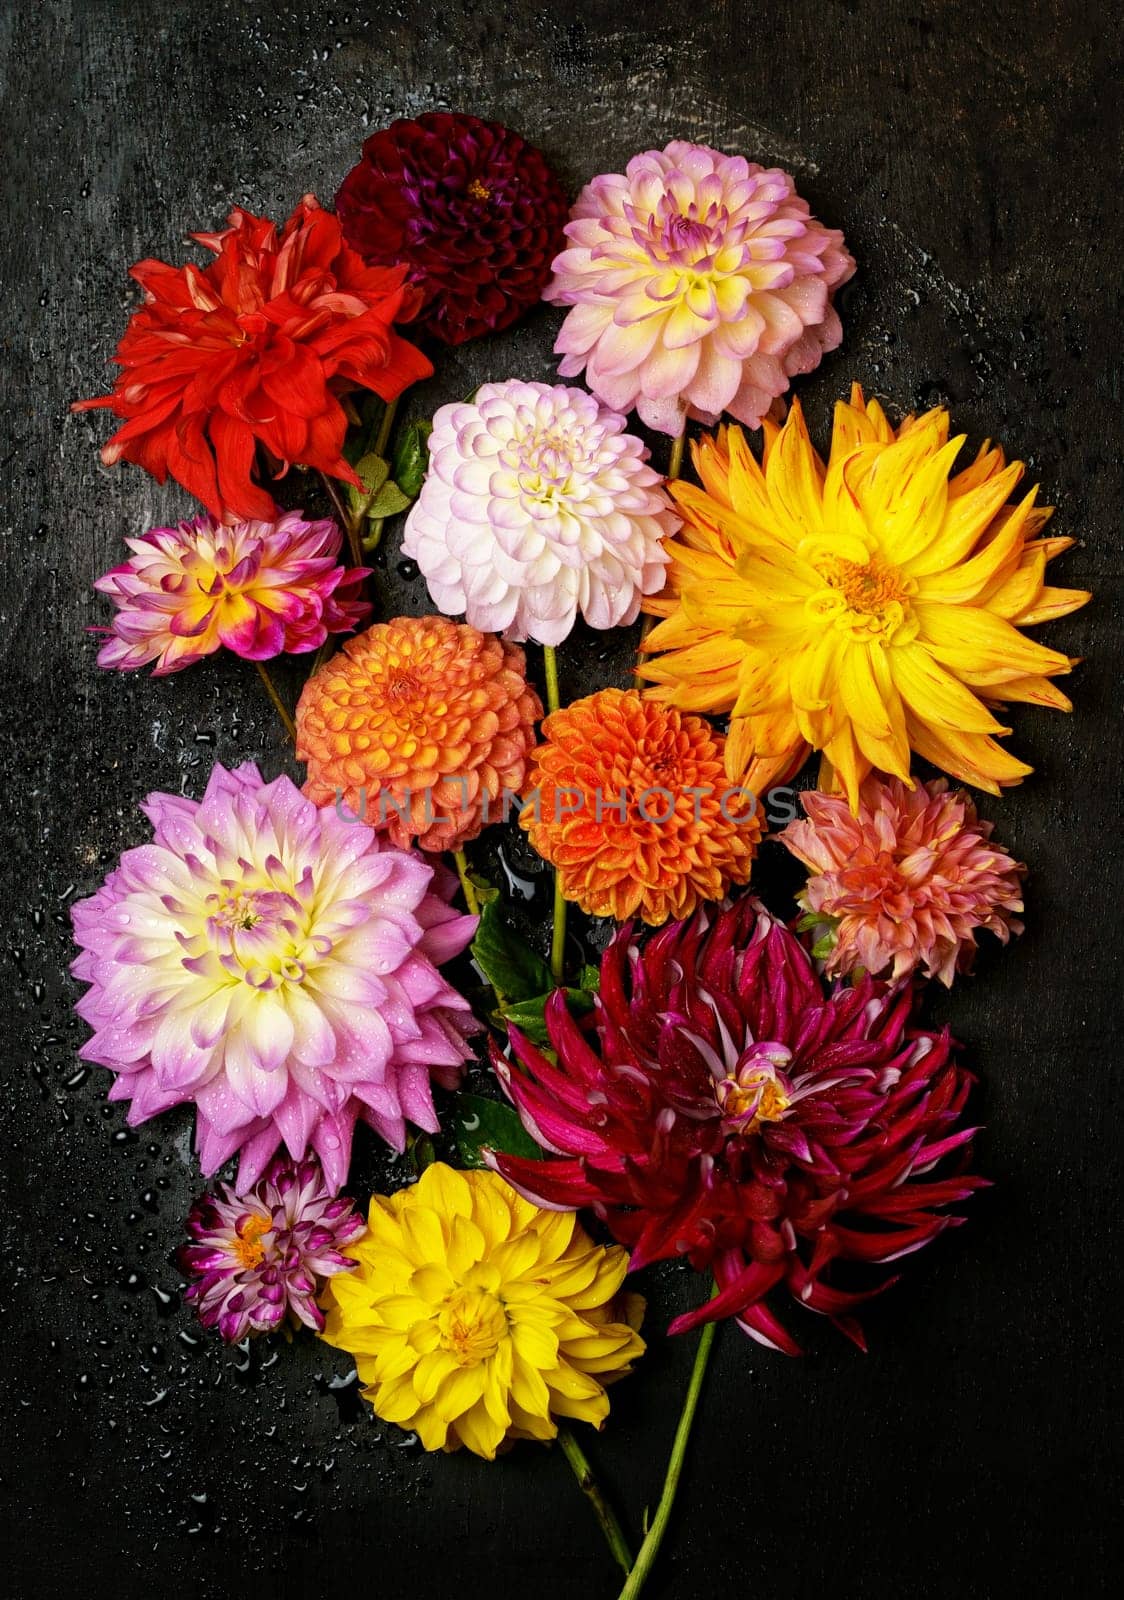 dahlias on a black background. bouquet of autumn flowers of yellow, red, pink flowers lie on a black wooden background by aprilphoto